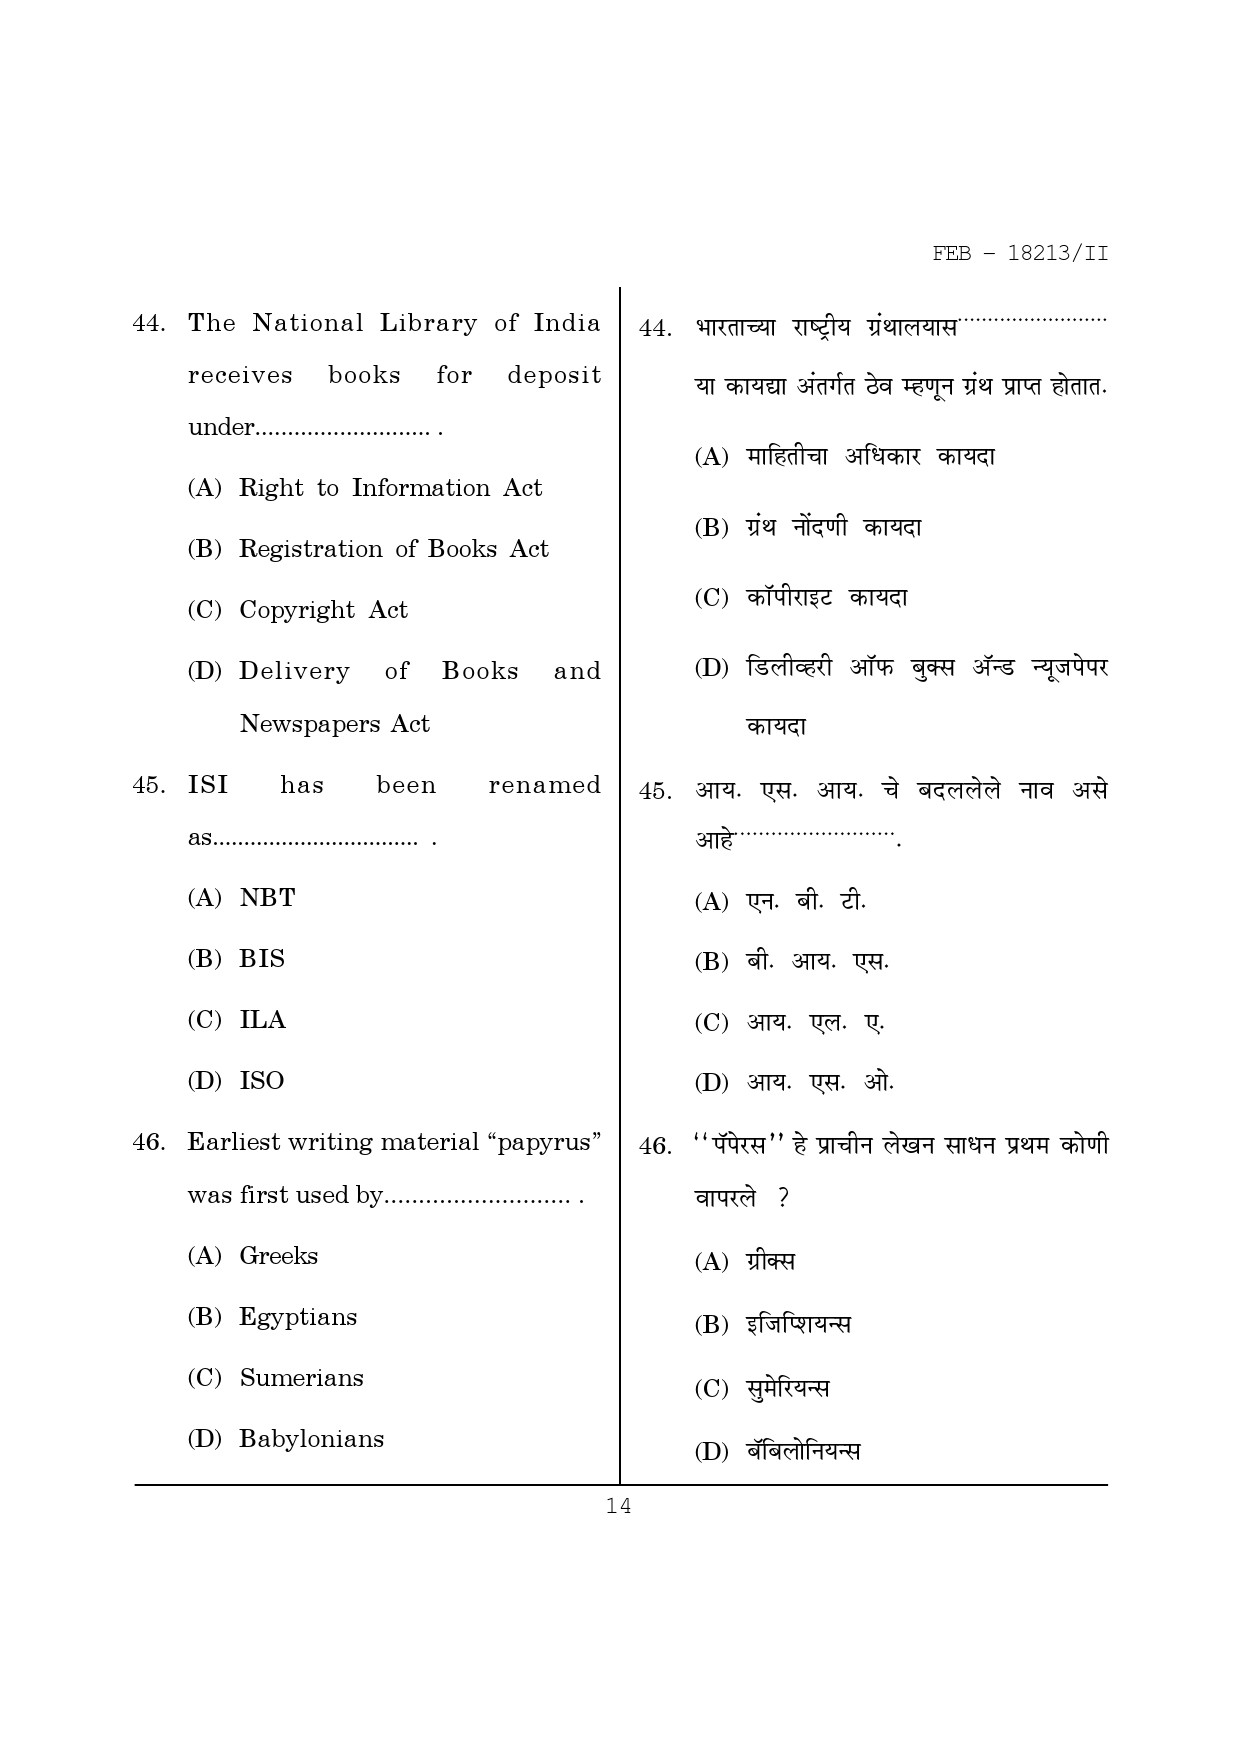 Maharashtra SET Library Information Science Question Paper II February 2013 14